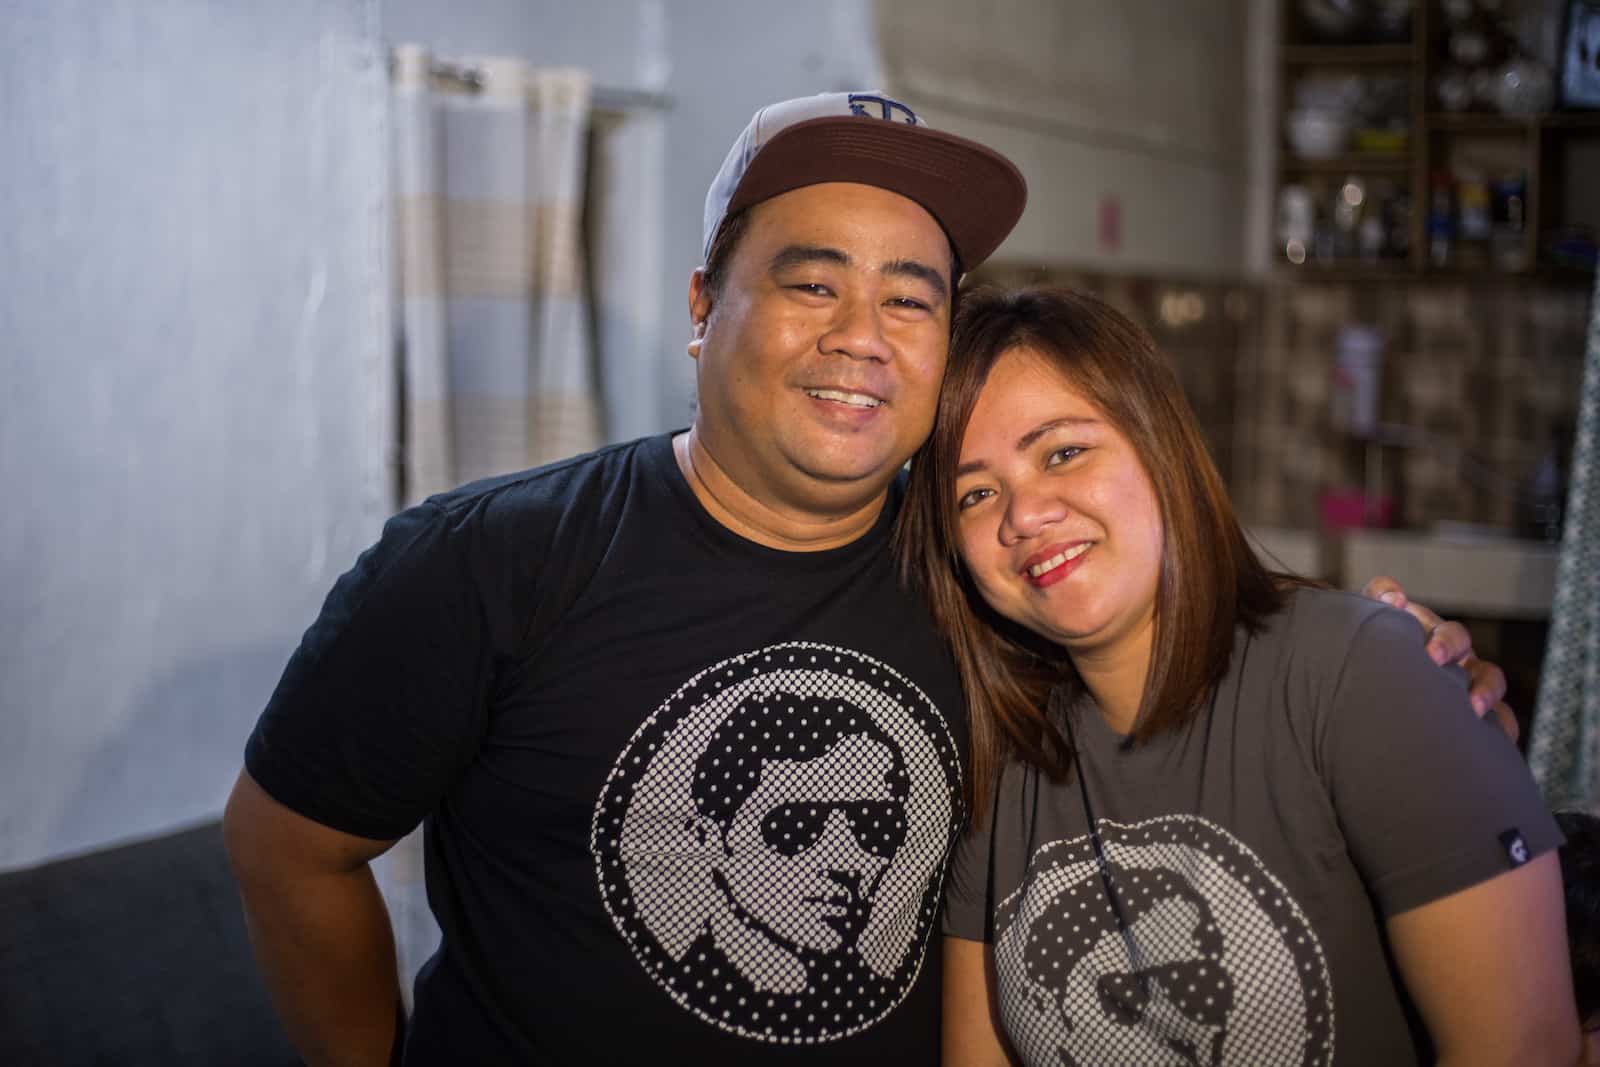 A man and a woman wearing matching black and grey T-shirts smile at the camera, the man's arm around the woman.